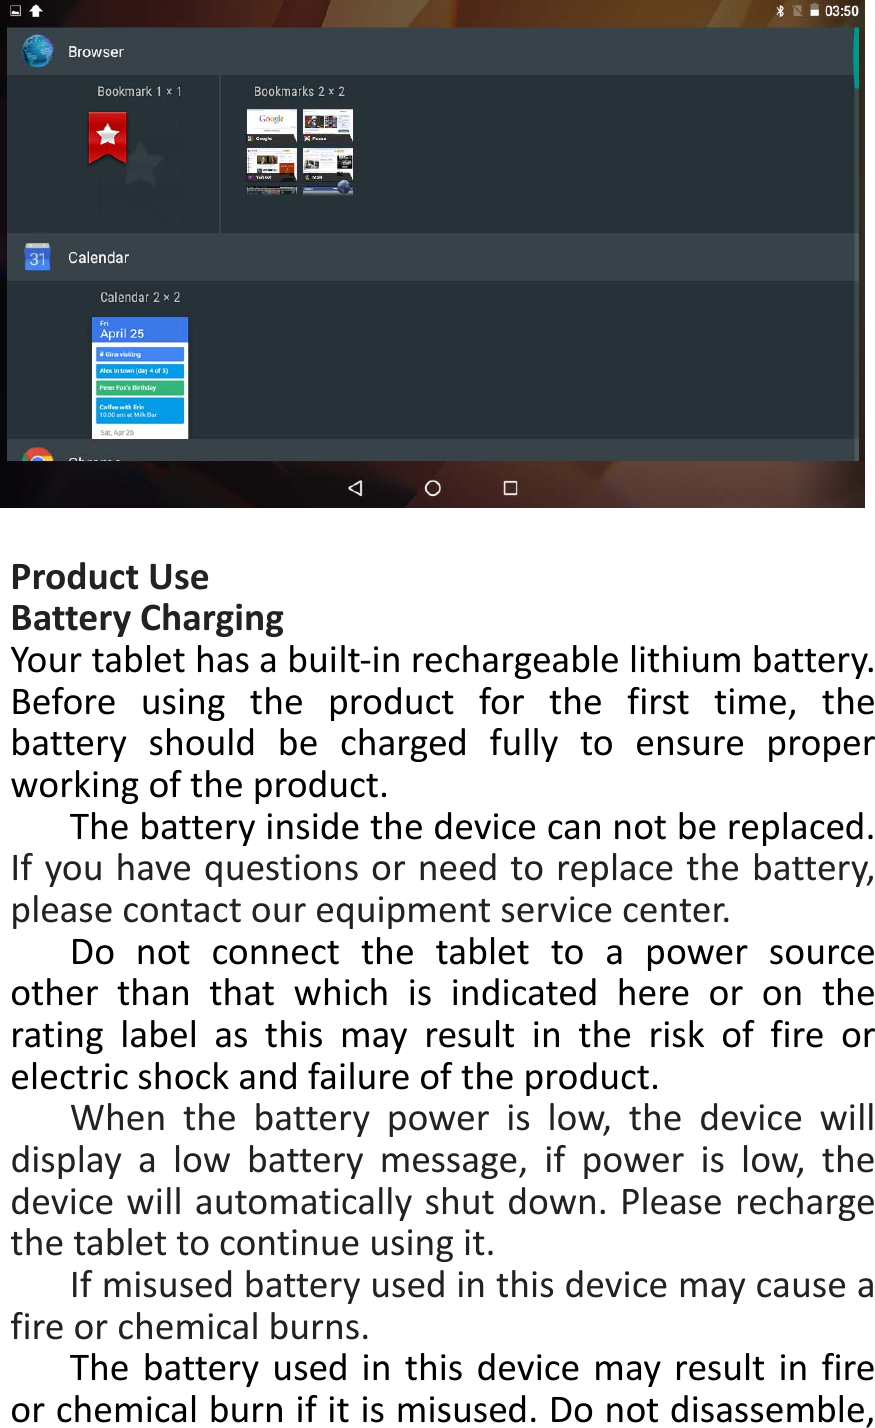  ProductUseBatteryChargingYourtablethasabuilt‐inrechargeablelithiumbattery.Beforeusingtheproductforthefirsttime,thebatteryshouldbechargedfullytoensureproperworkingoftheproduct.Thebatteryinsidethedevicecannotbereplaced.Ifyouhavequestionsorneedtoreplacethebattery,pleasecontactourequipmentservicecenter.Donotconnectthetablettoapowersourceotherthanthatwhichisindicatedhereorontheratinglabelasthismayresultintheriskoffireorelectricshockandfailureoftheproduct.Whenthebatterypowerislow,thedevicewilldisplayalowbatterymessage,ifpowerislow,thedevicewillautomaticallyshutdown.Pleaserechargethetablettocontinueusingit.Ifmisusedbatteryusedinthisdevicemaycauseafireorchemicalburns.Thebatteryusedinthisdevicemayresultinfireorchemicalburnifitismisused.Donotdisassemble,